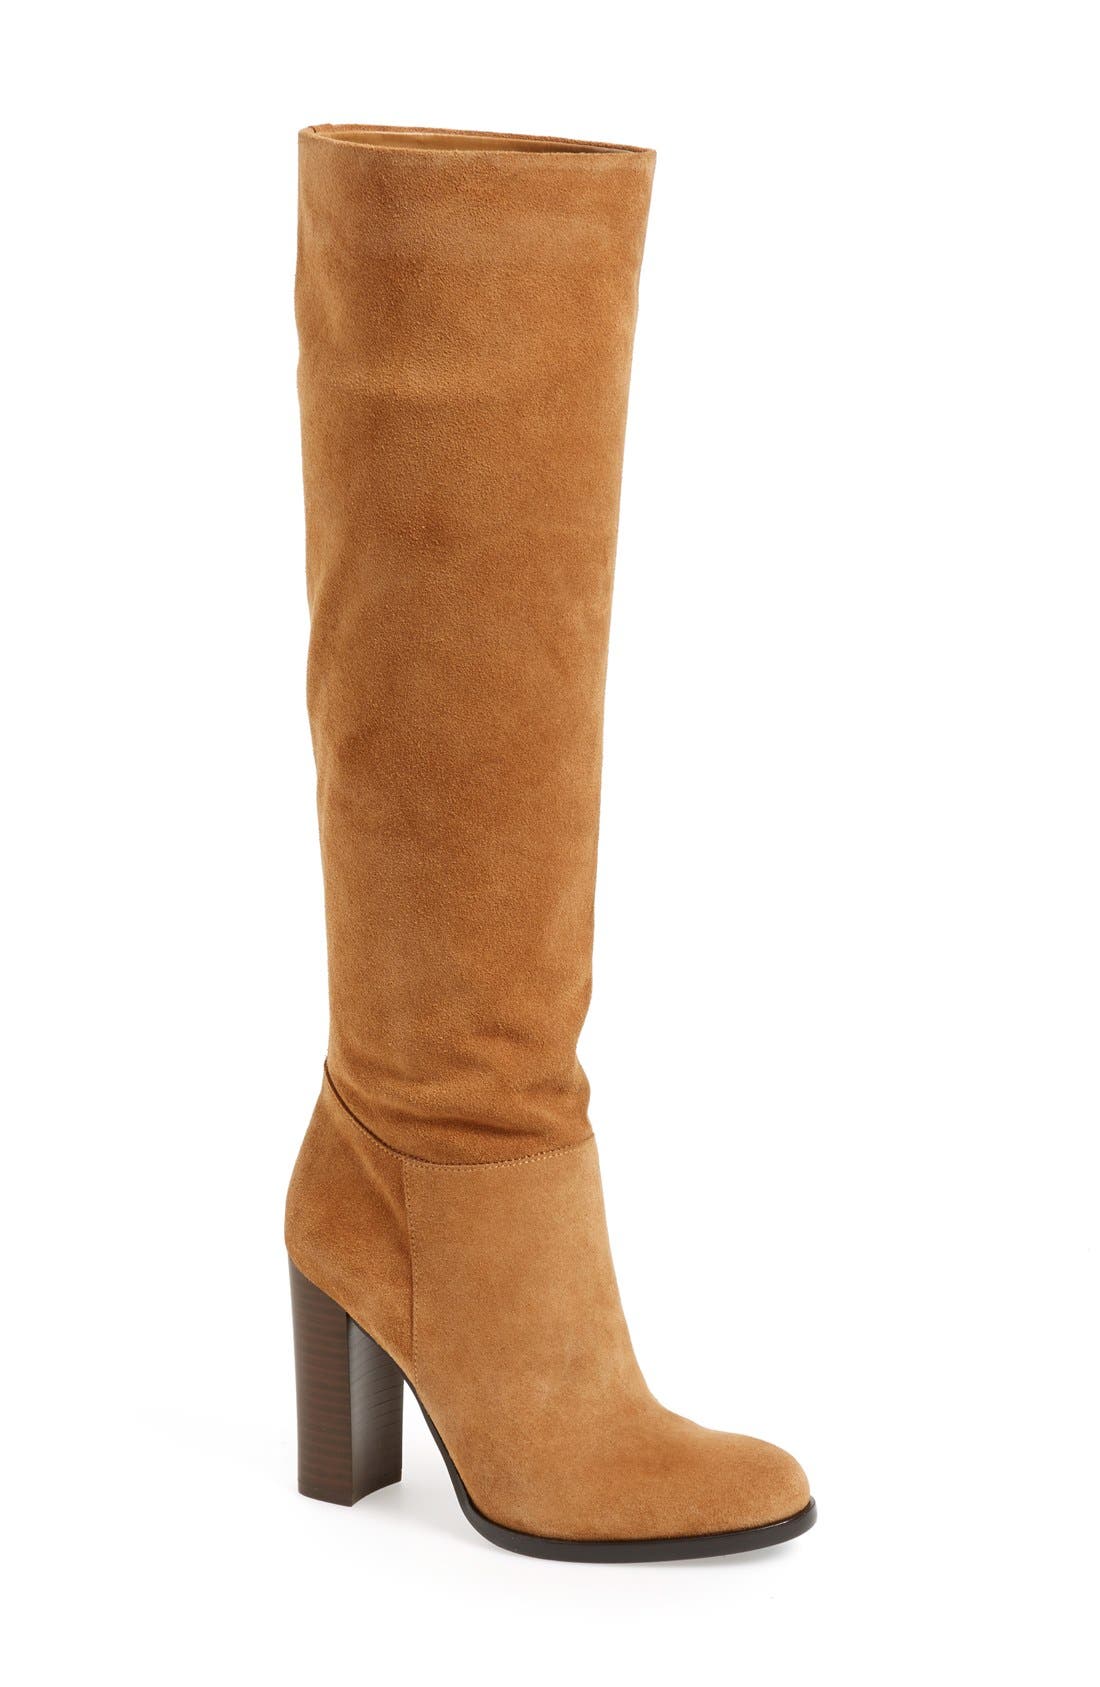 slouch boots nordstrom